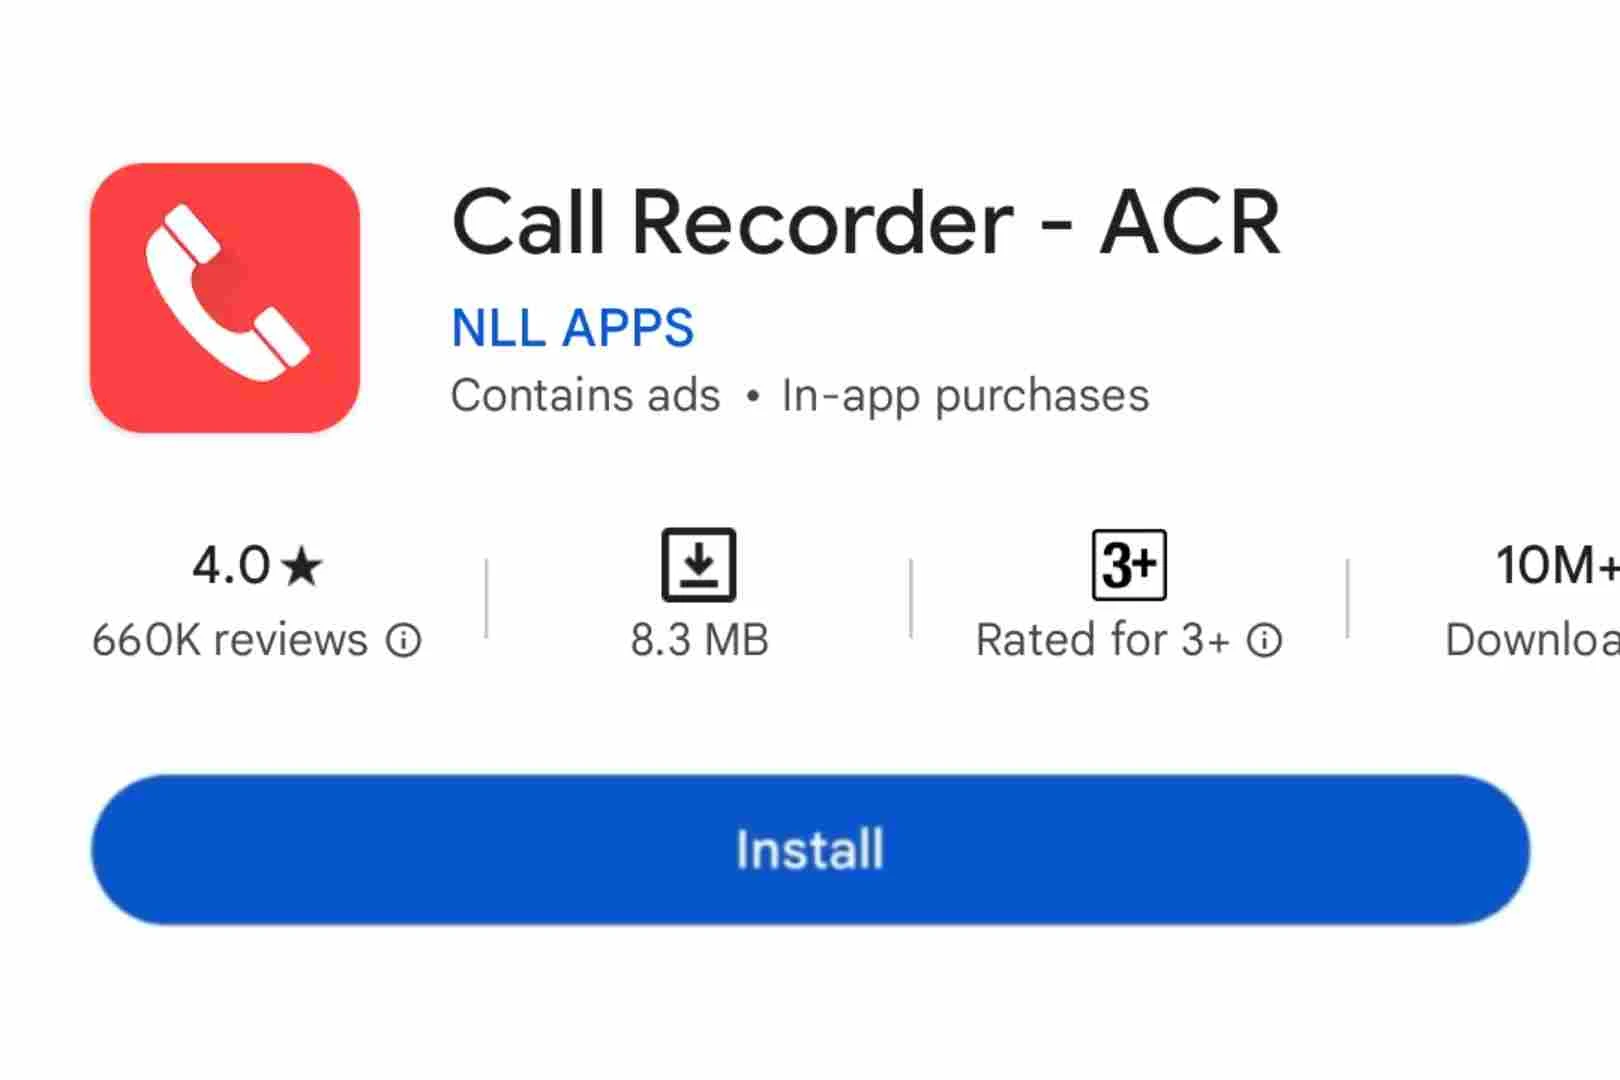 Call Recorder - ACR by NLL